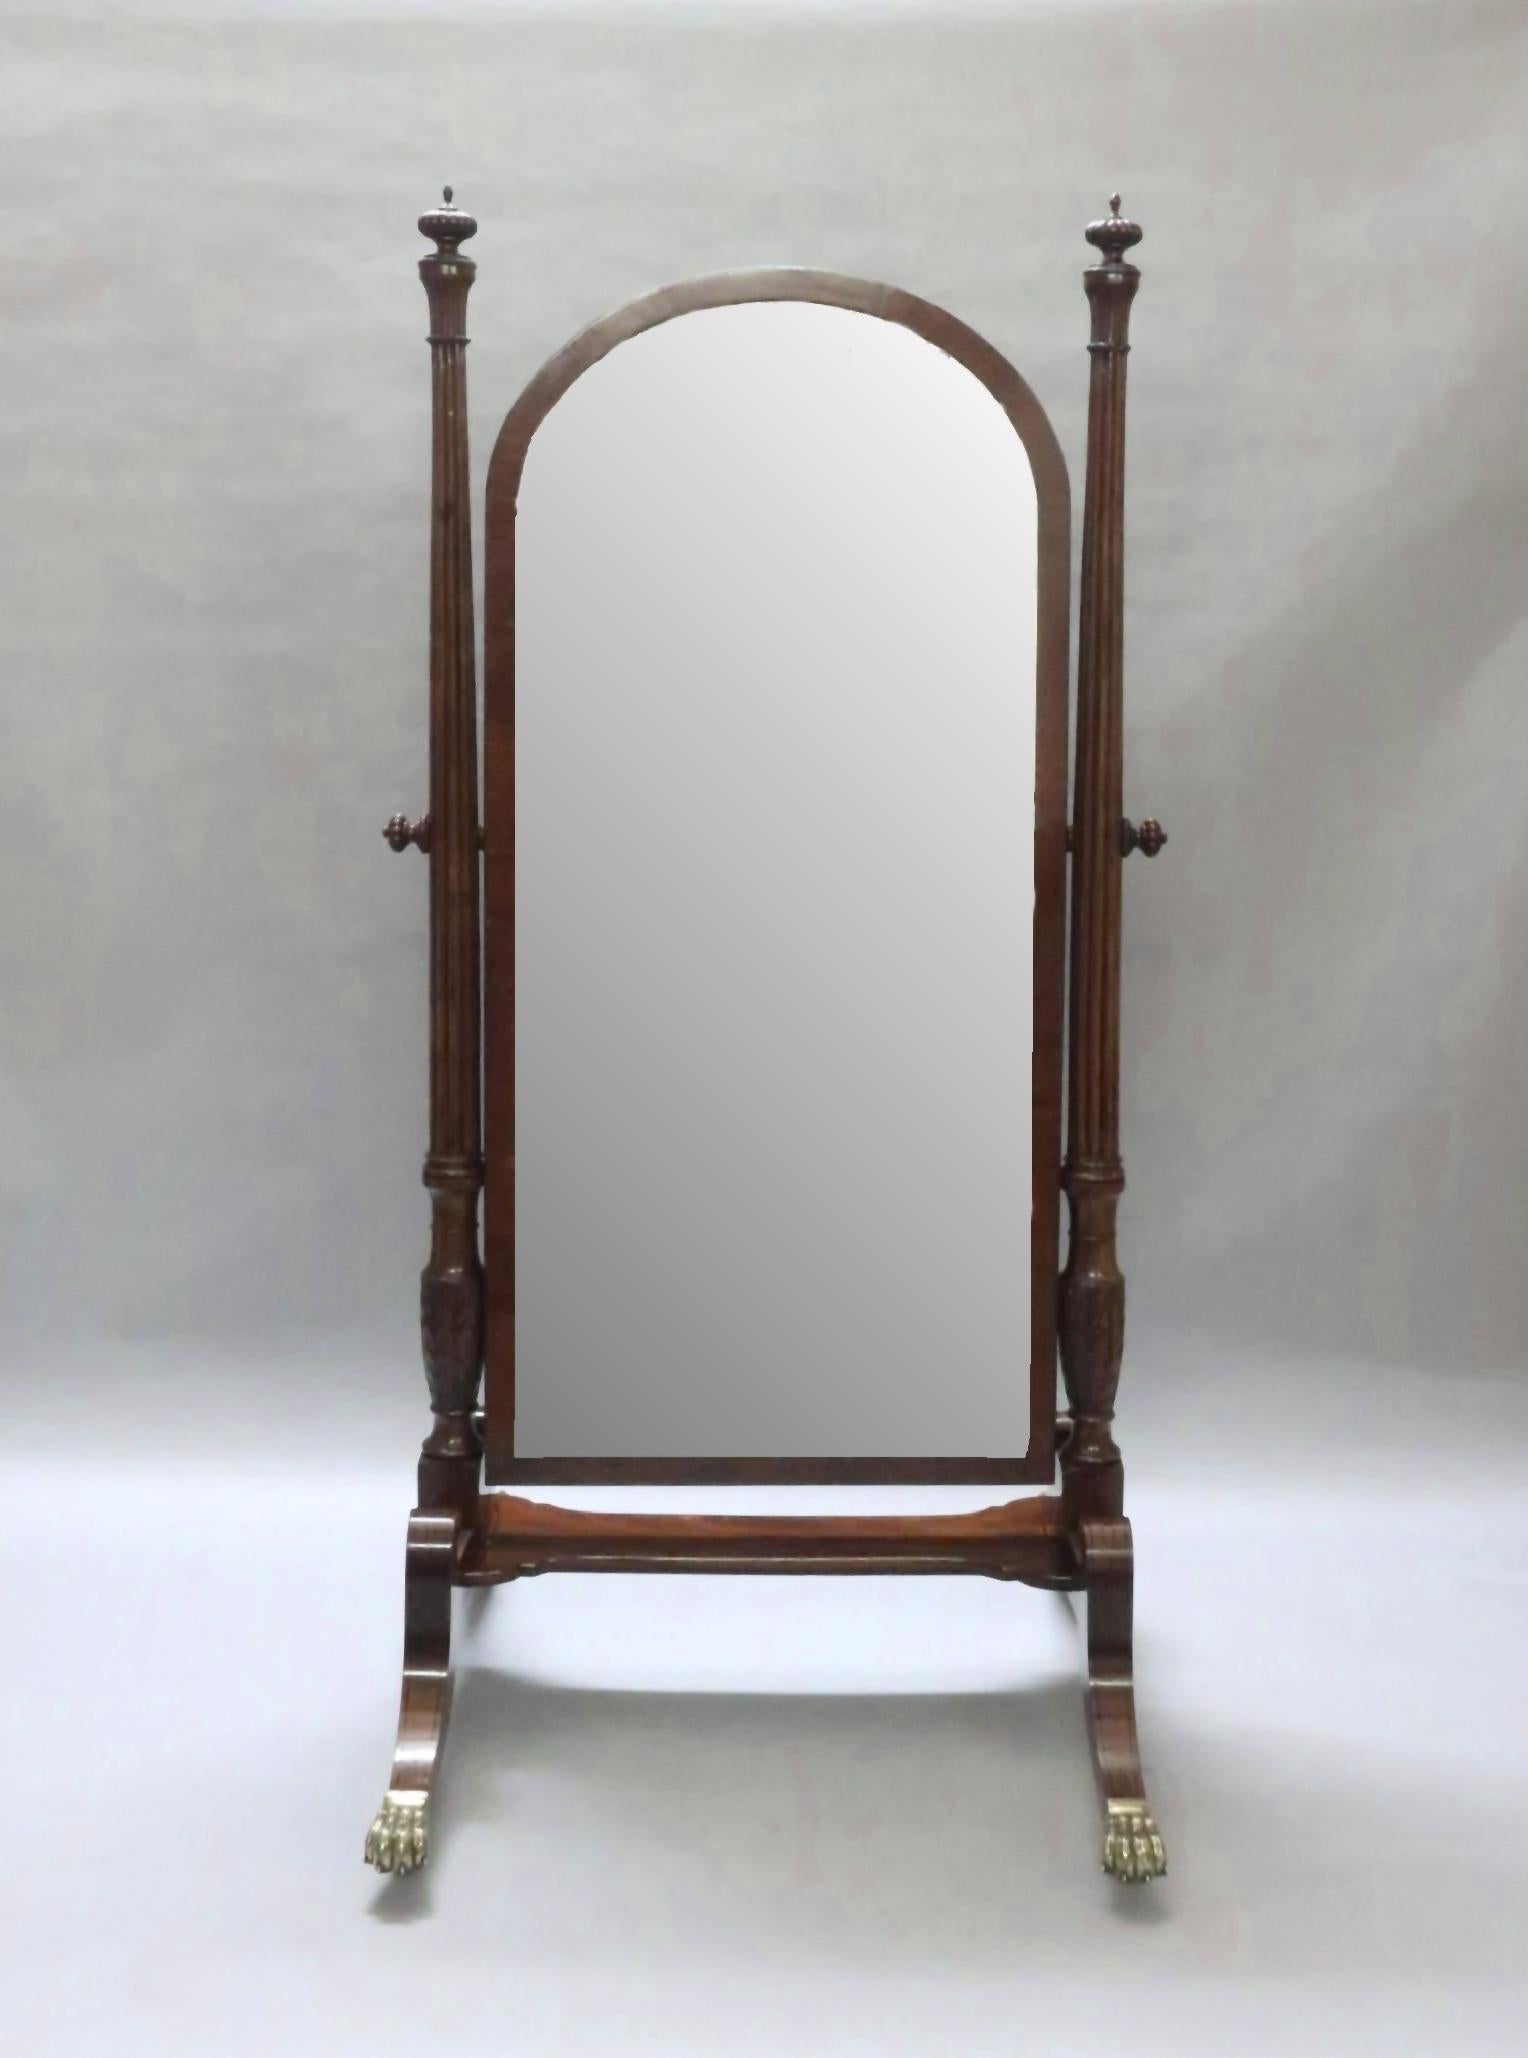 A fabulous quality and impressive George III mahogany country house cheval mirror attributed to Gillows of Lancaster. The mirror base has four 'c' scroll tapering sabre legs with ebony string inlay in a geometrical design terminating to substantial